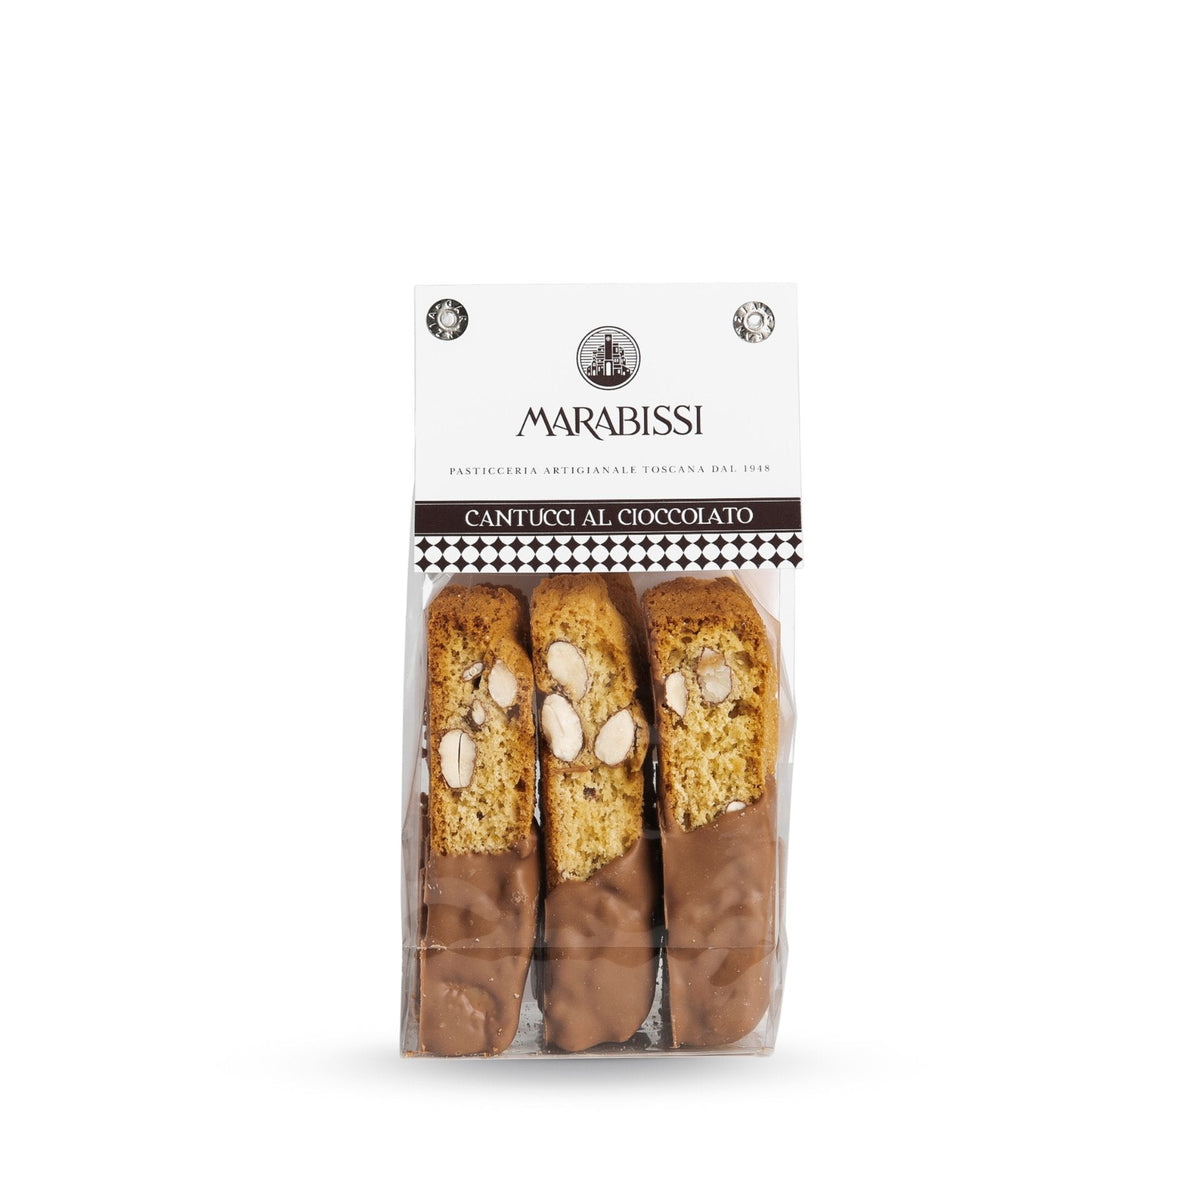 Marabissi Chocolate Covered Cantucci (Bag) 150g  | Imported and distributed in the UK by Just Gourmet Foods